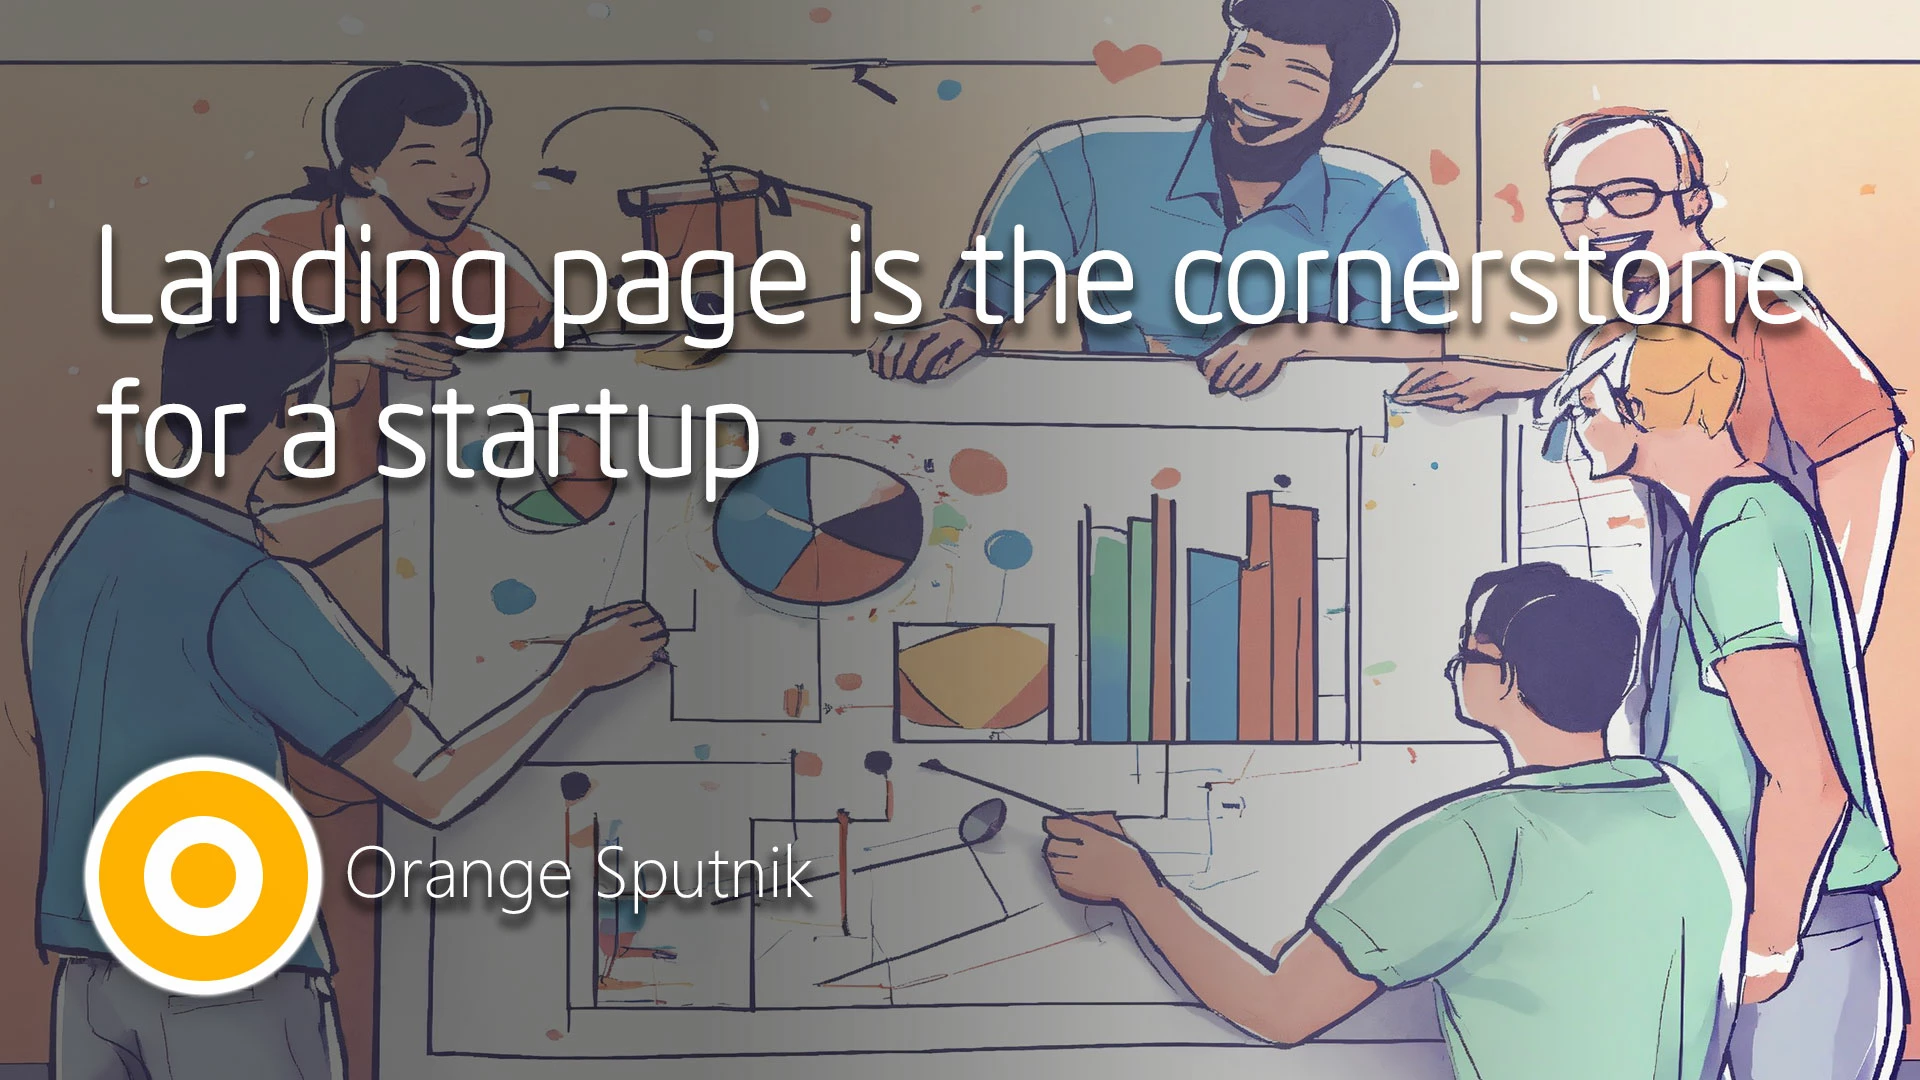 Landing page is the cornerstone for a startup